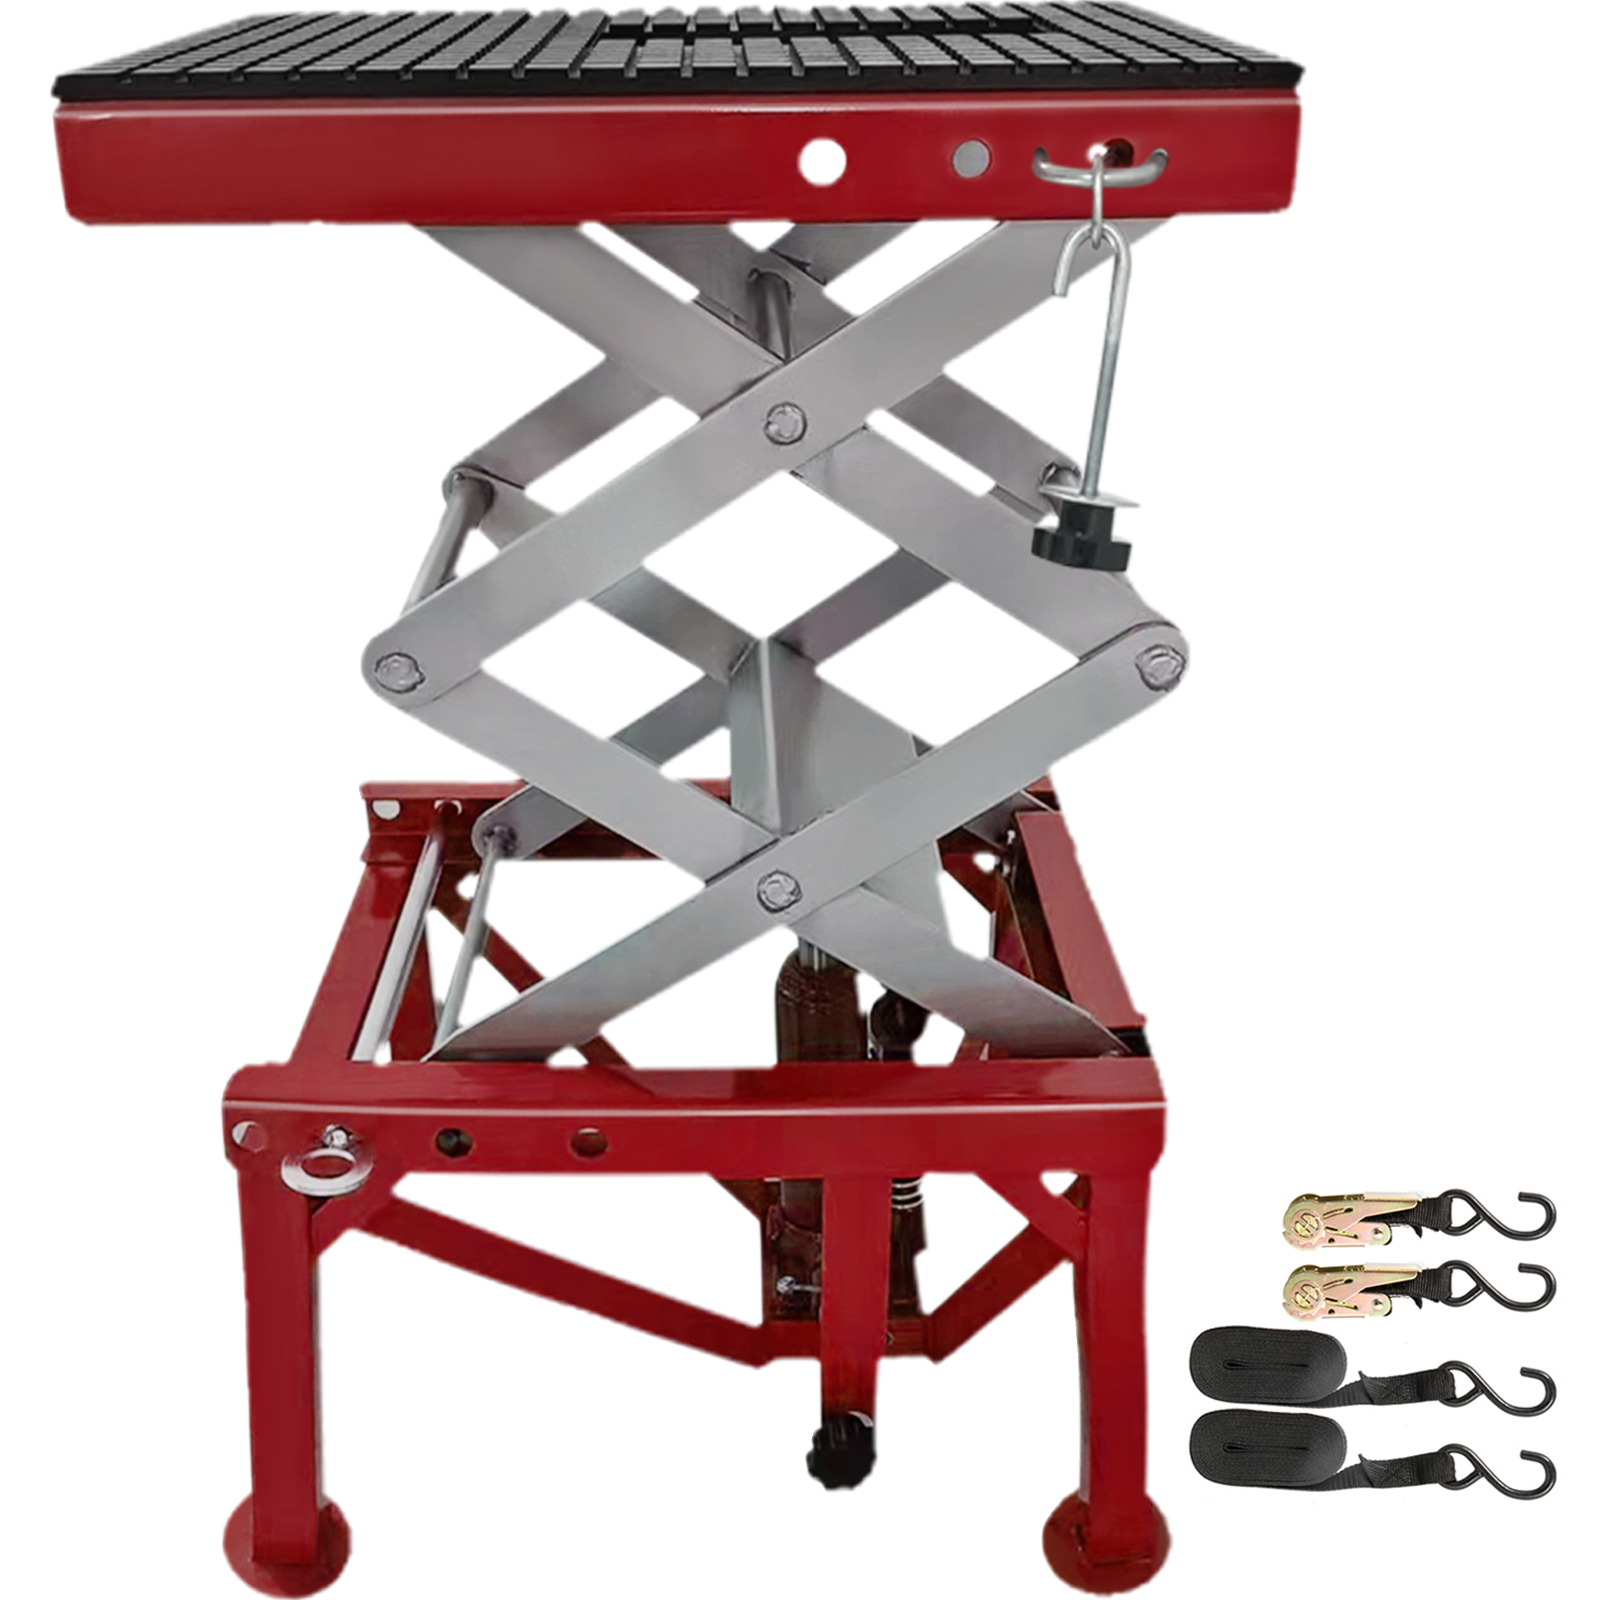 Red 300lbs Heavy Duty Hydraulic Motorcycle Adjustable Scissor Jack Lift with The Foot Peg Hold Downs Fit for Motorbike Dirt Bike Hydraulic Center Stand Lift 